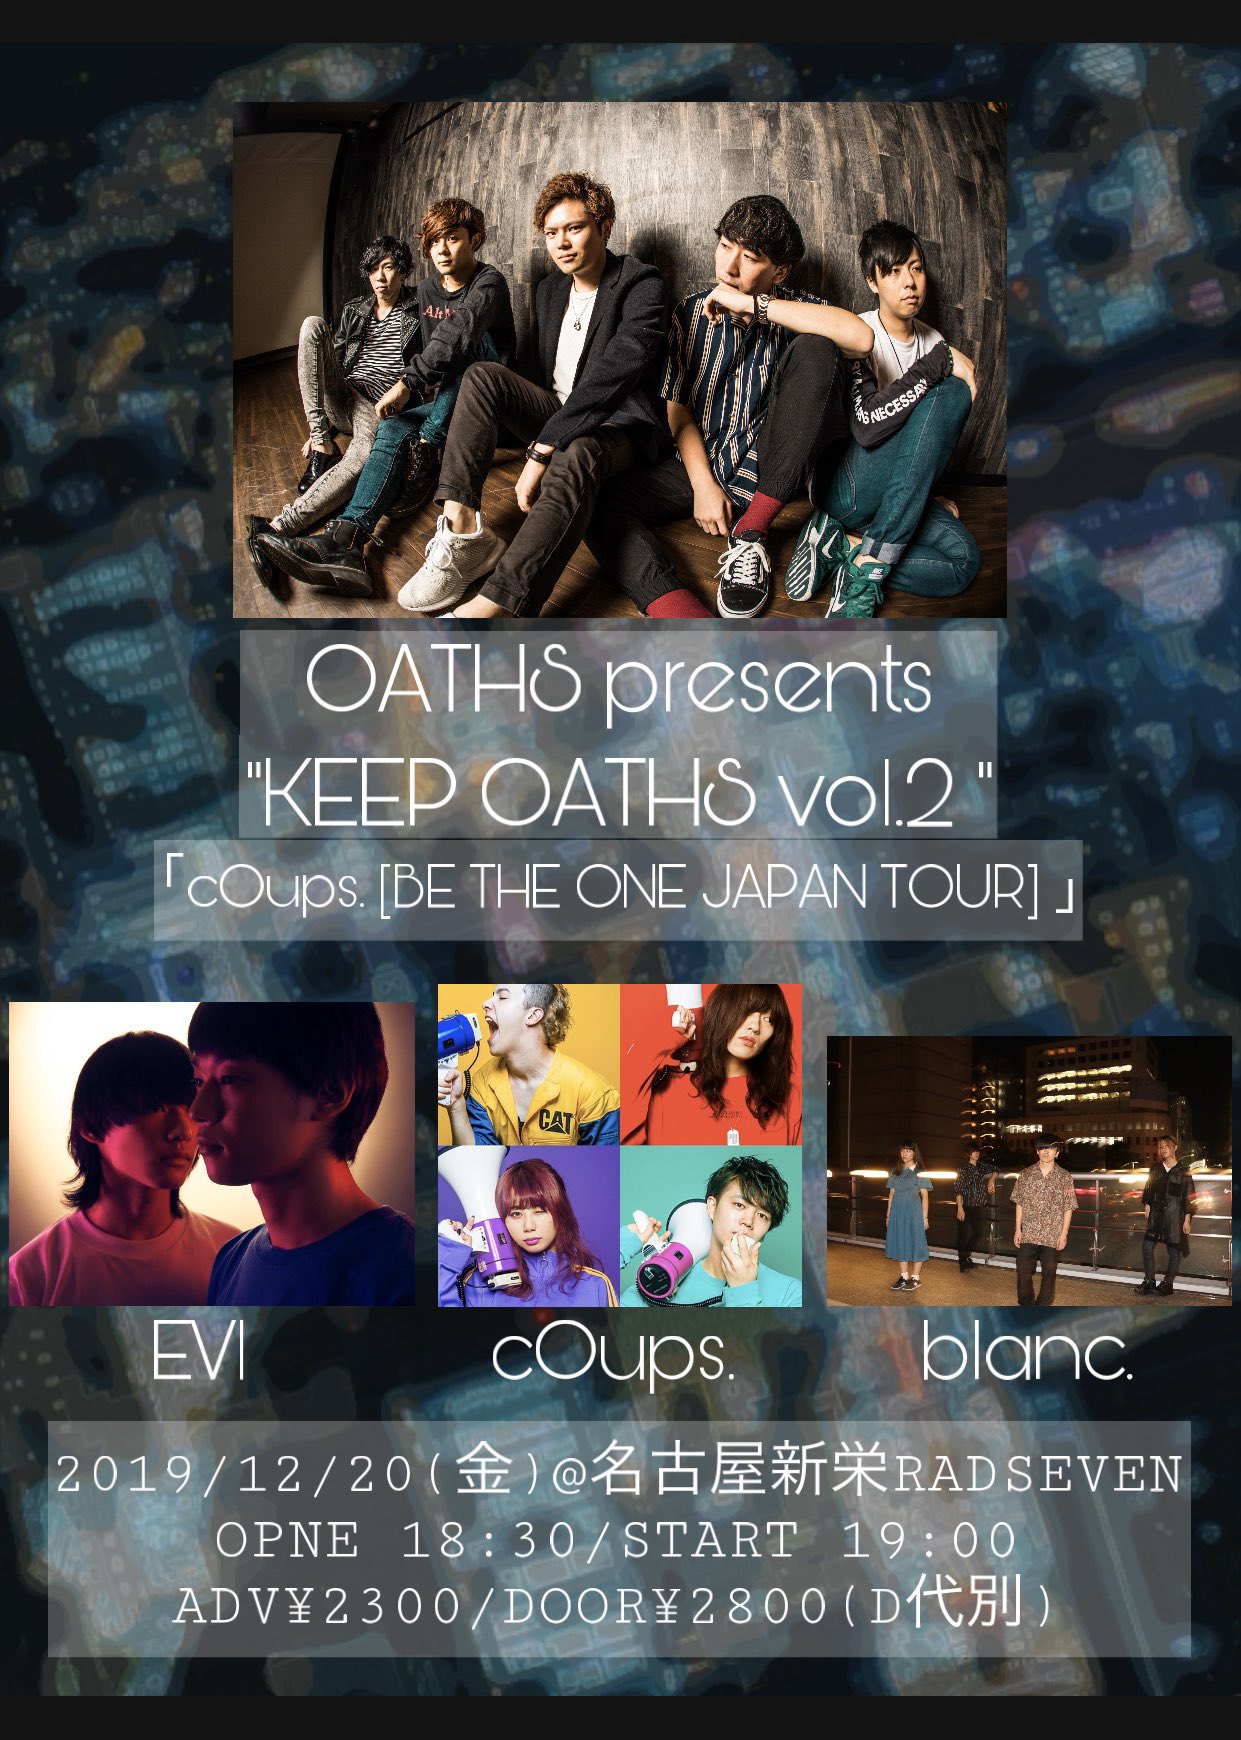 OATHS presents KEEP OATHS vol.2 「cOups. [BE THE ONE JAPAN TOUR] 」